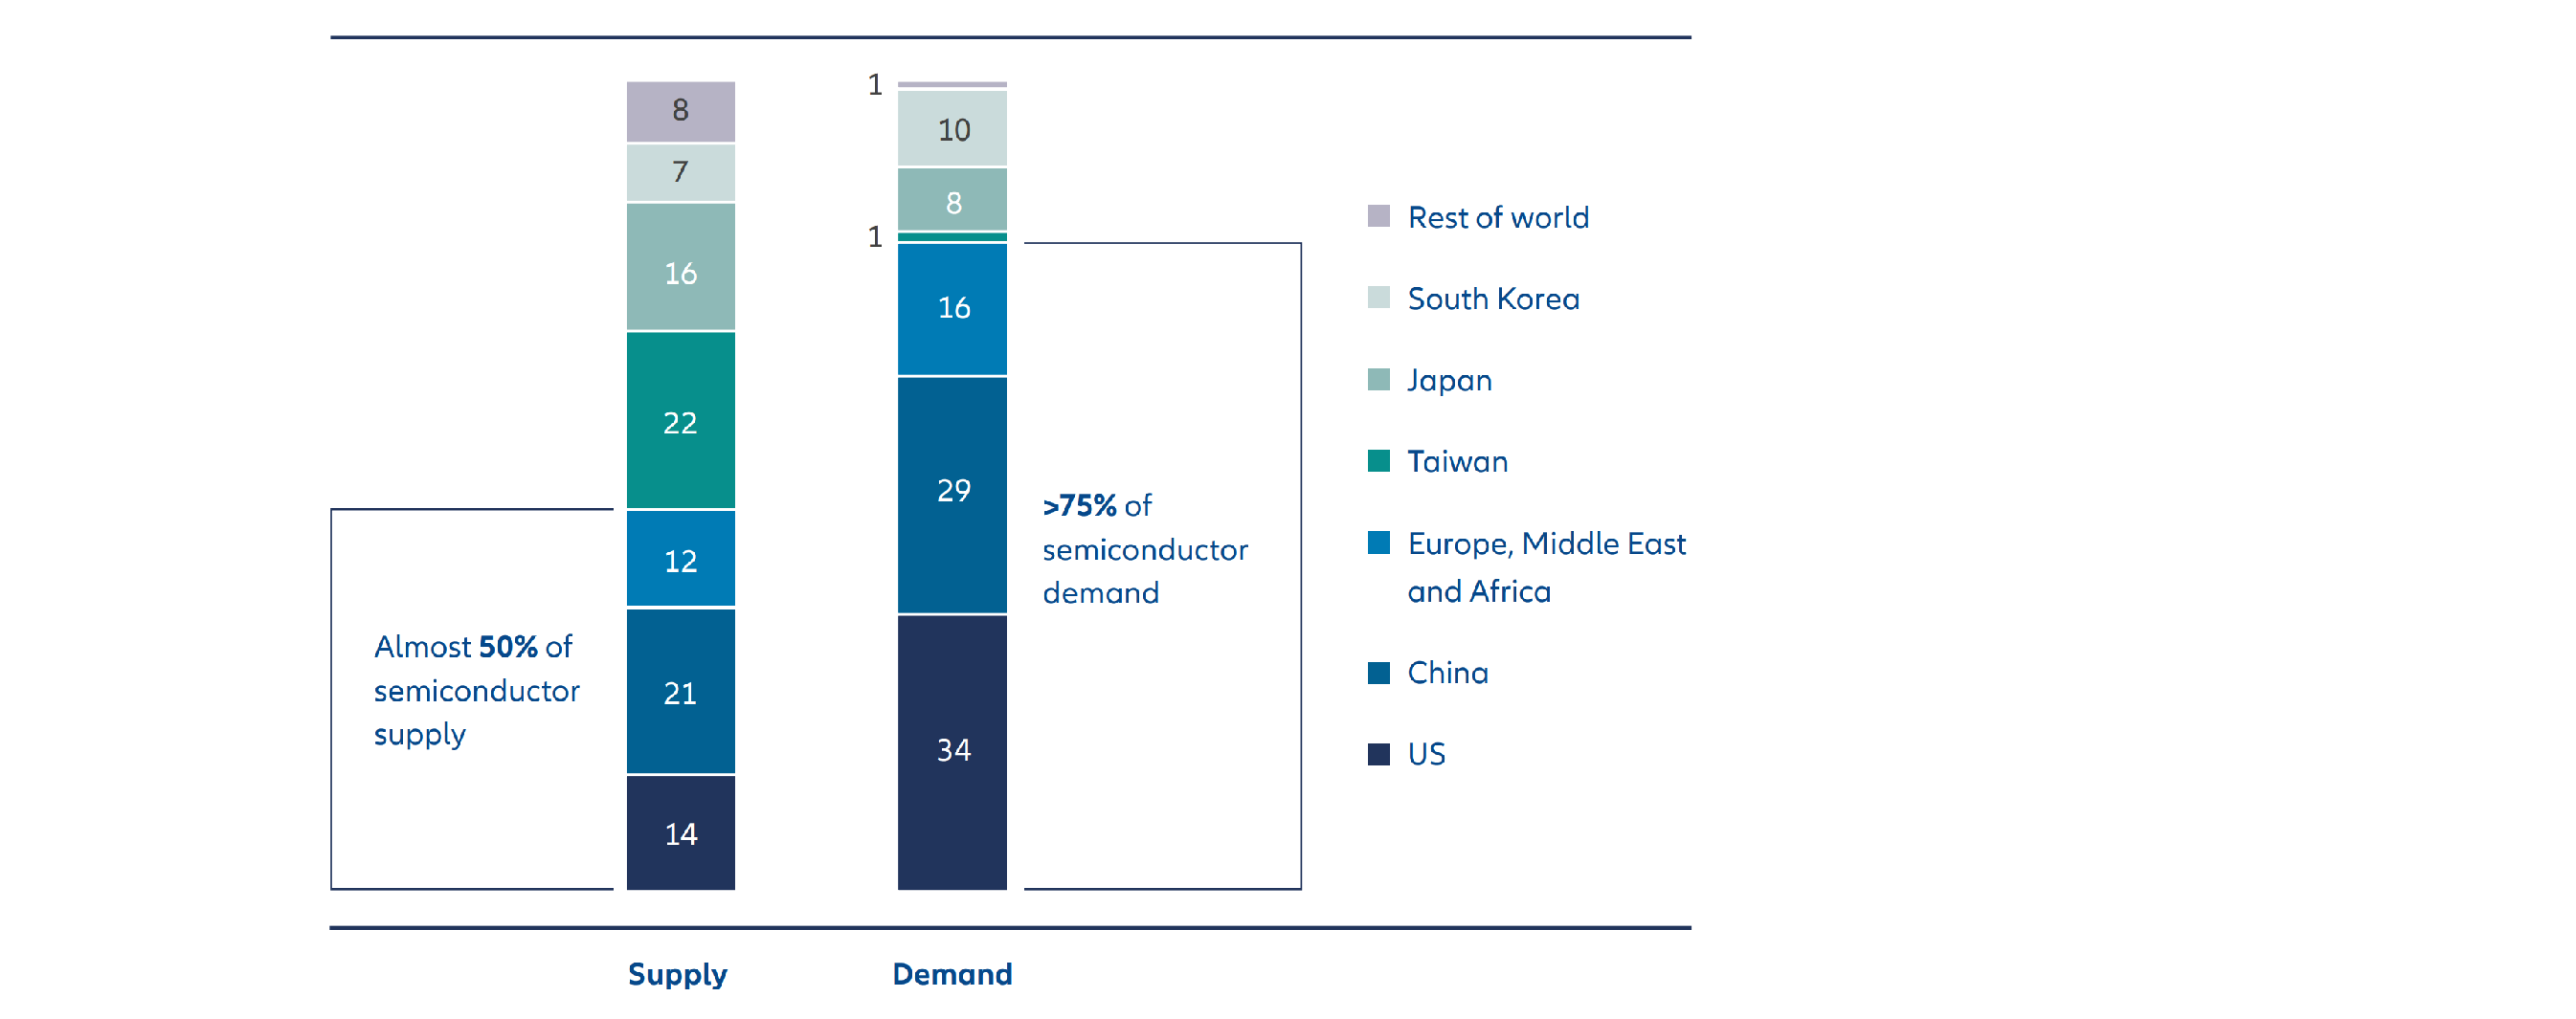 Exhibit 2: Semiconductor supply and demand by region in 2021 (% share)